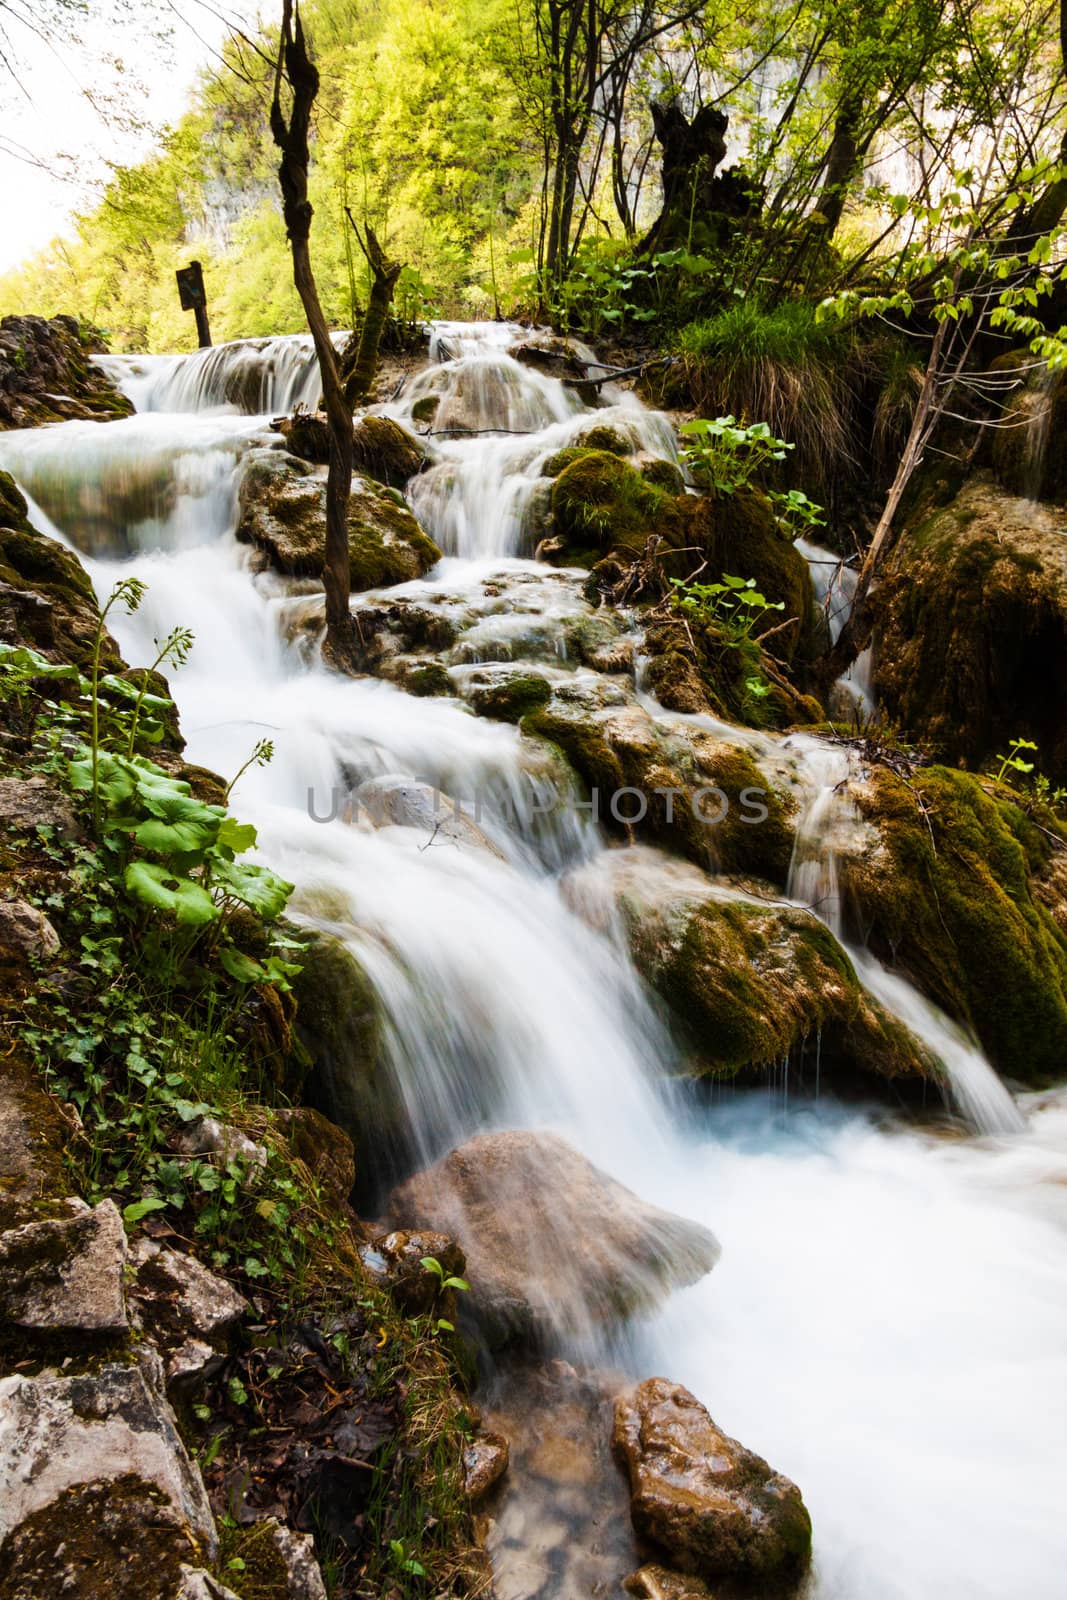 Whitewater running in the forest. Plitvice Lakes National Park,  by Lamarinx